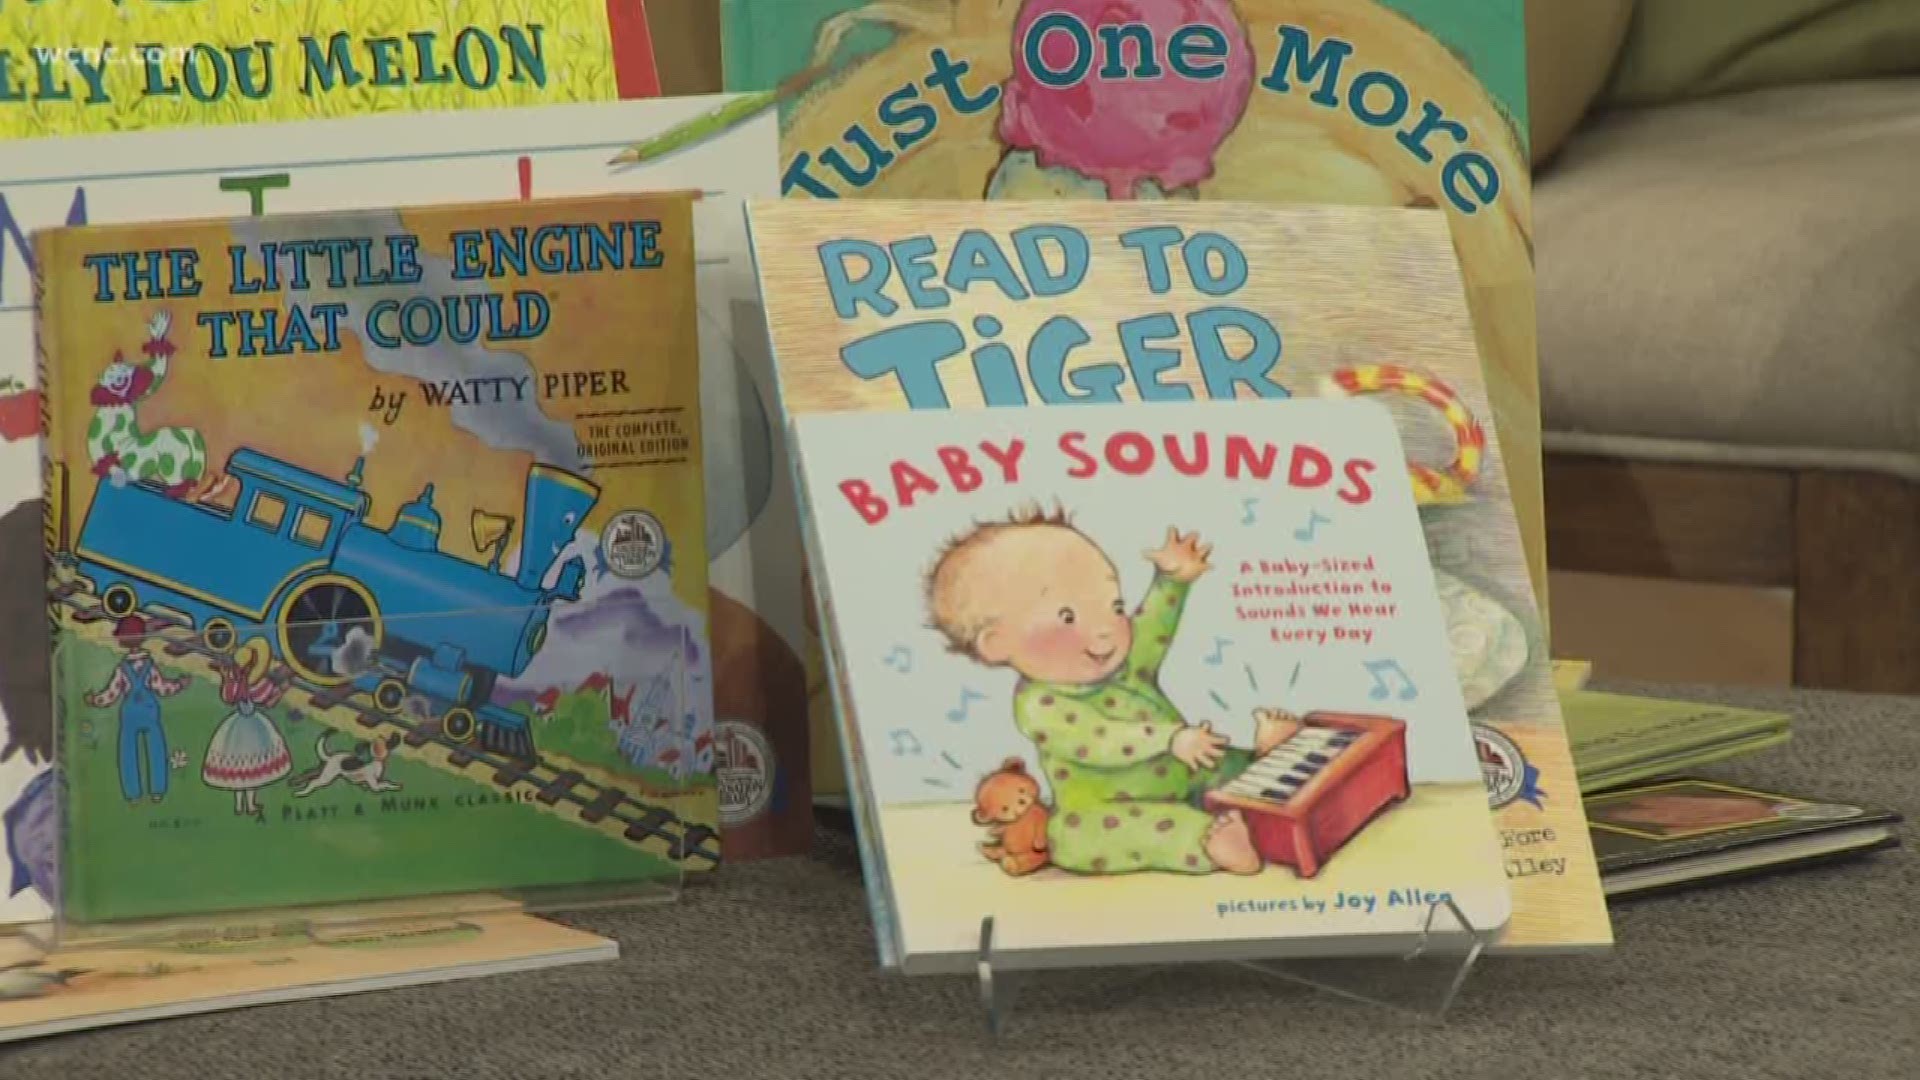 Lee Henderson  tells us about the reading program that is helping kids